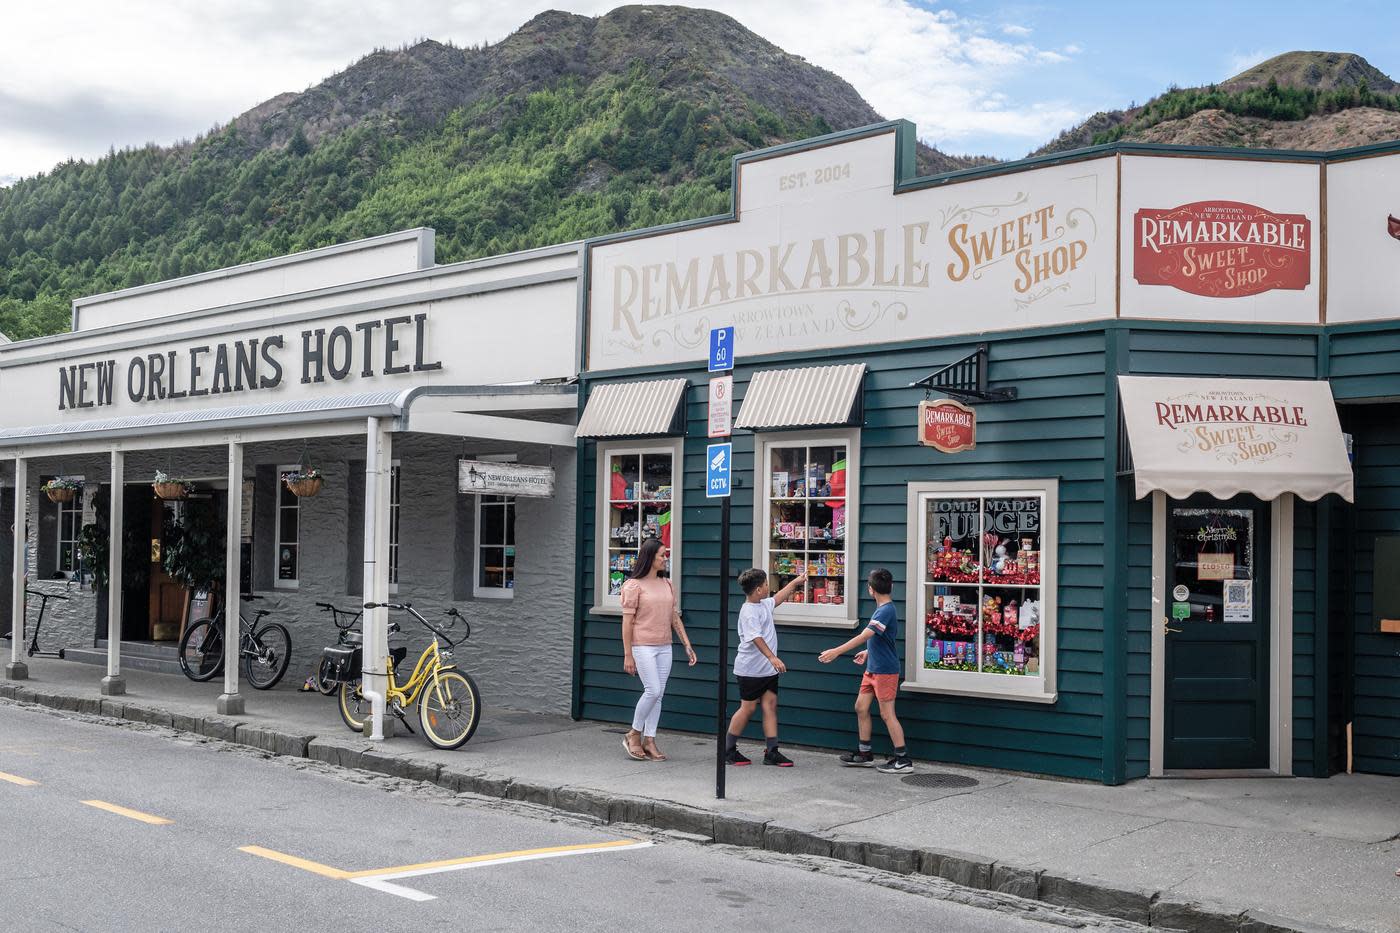 Mother and children walking past the Remarkable Sweet Shop store in Arrowtown